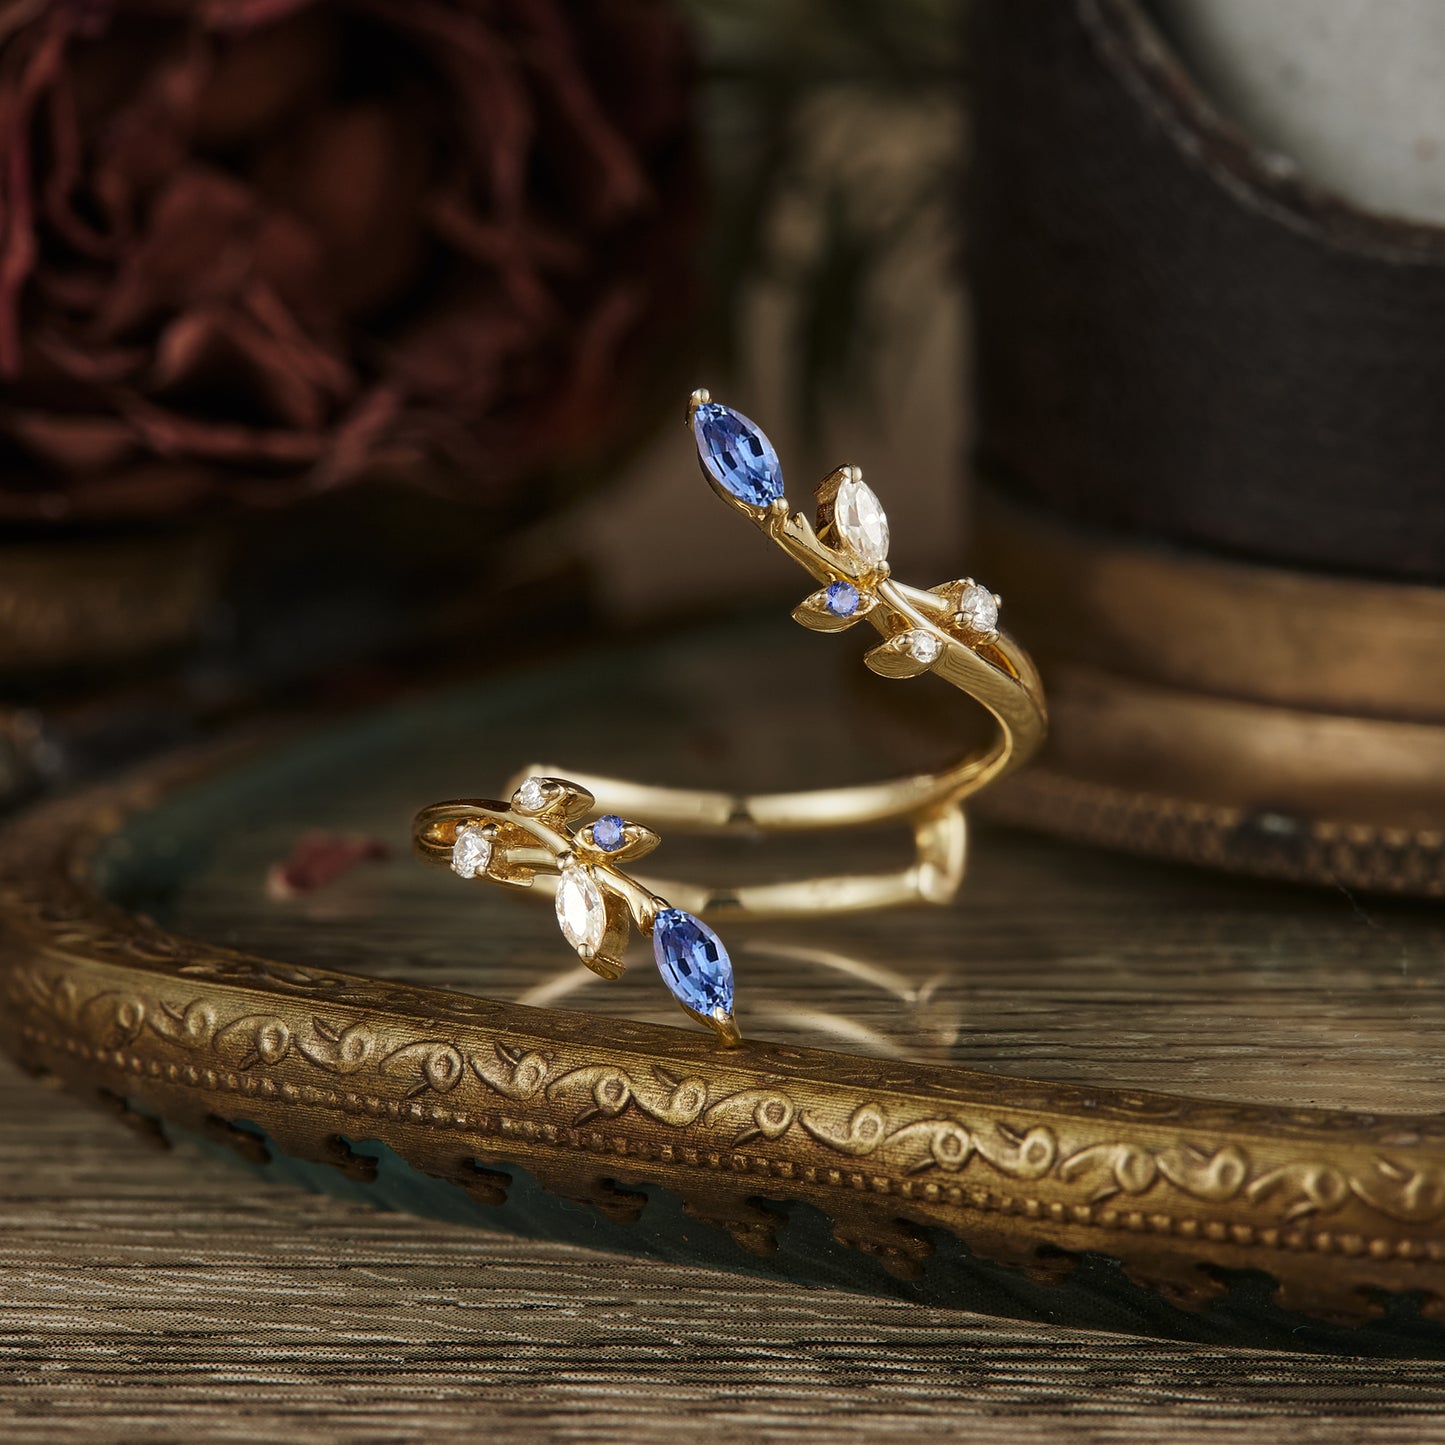 Daphne's Blossoming Band: A Sapphire and Moissanite Wedding Ring